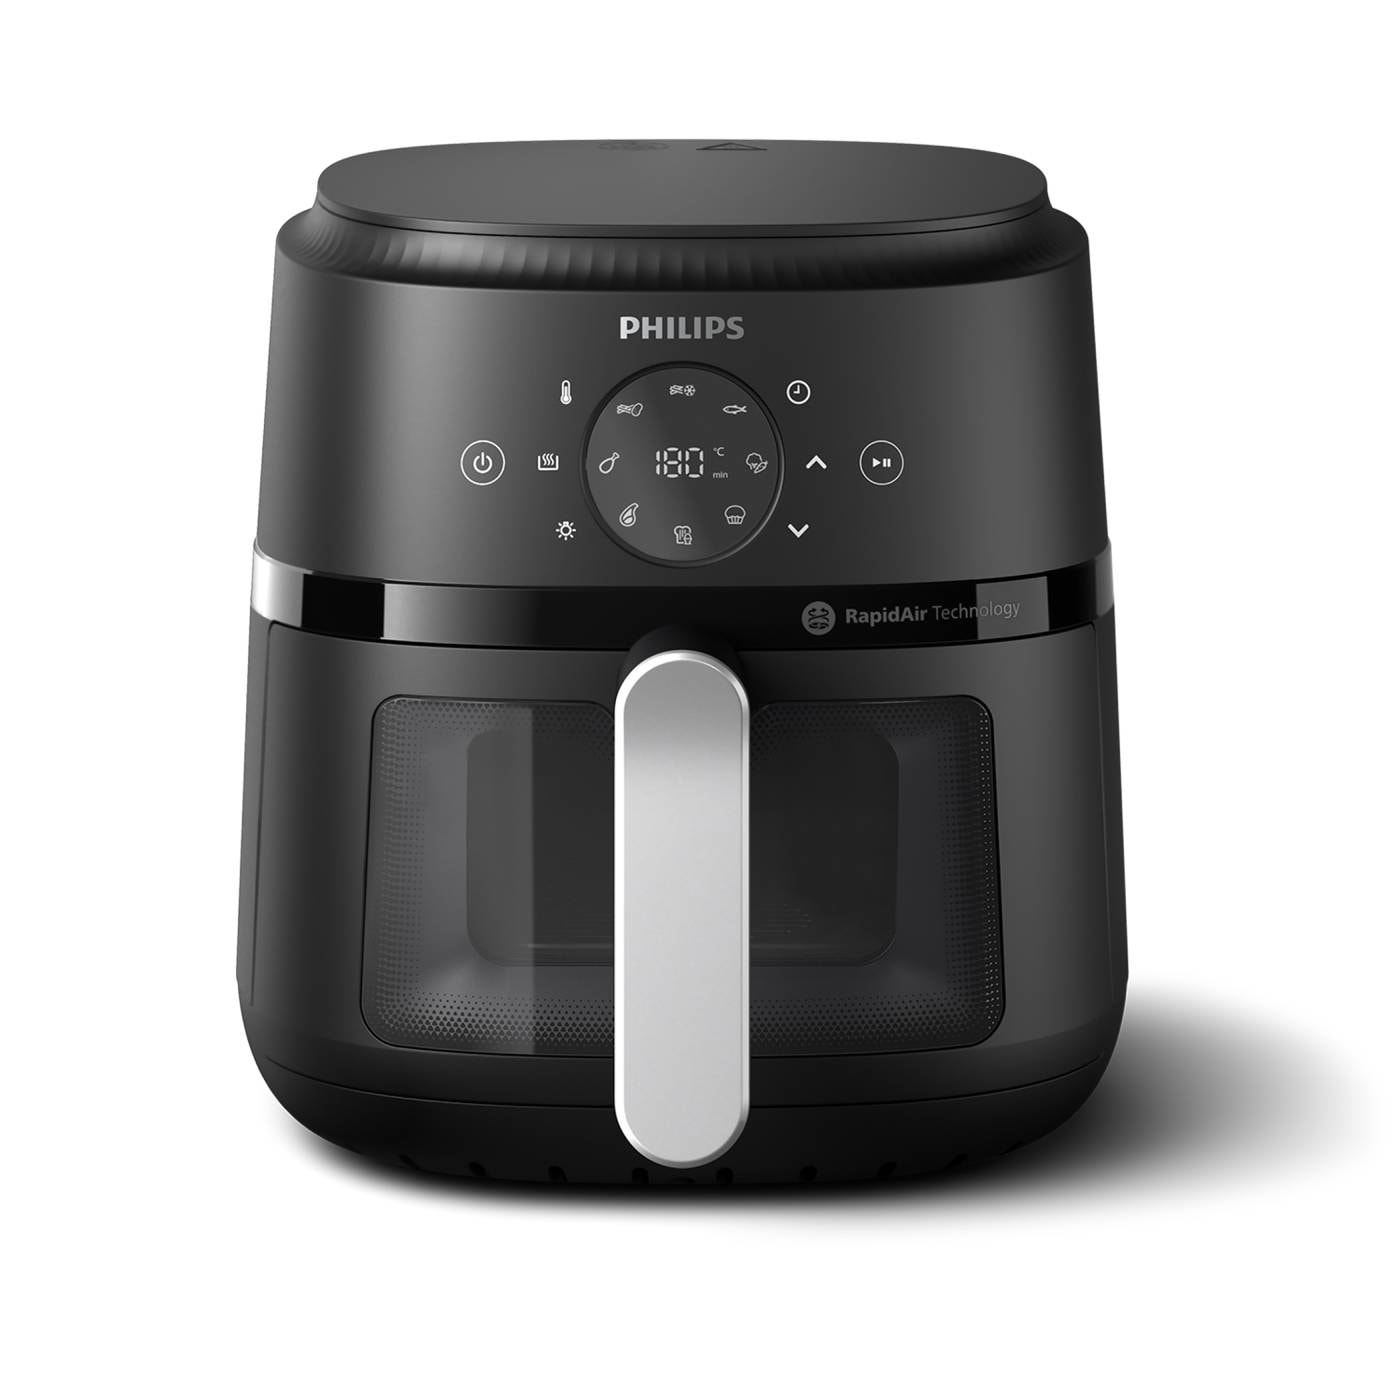 PHILIPS Friteuse à air chaud   NA221/00